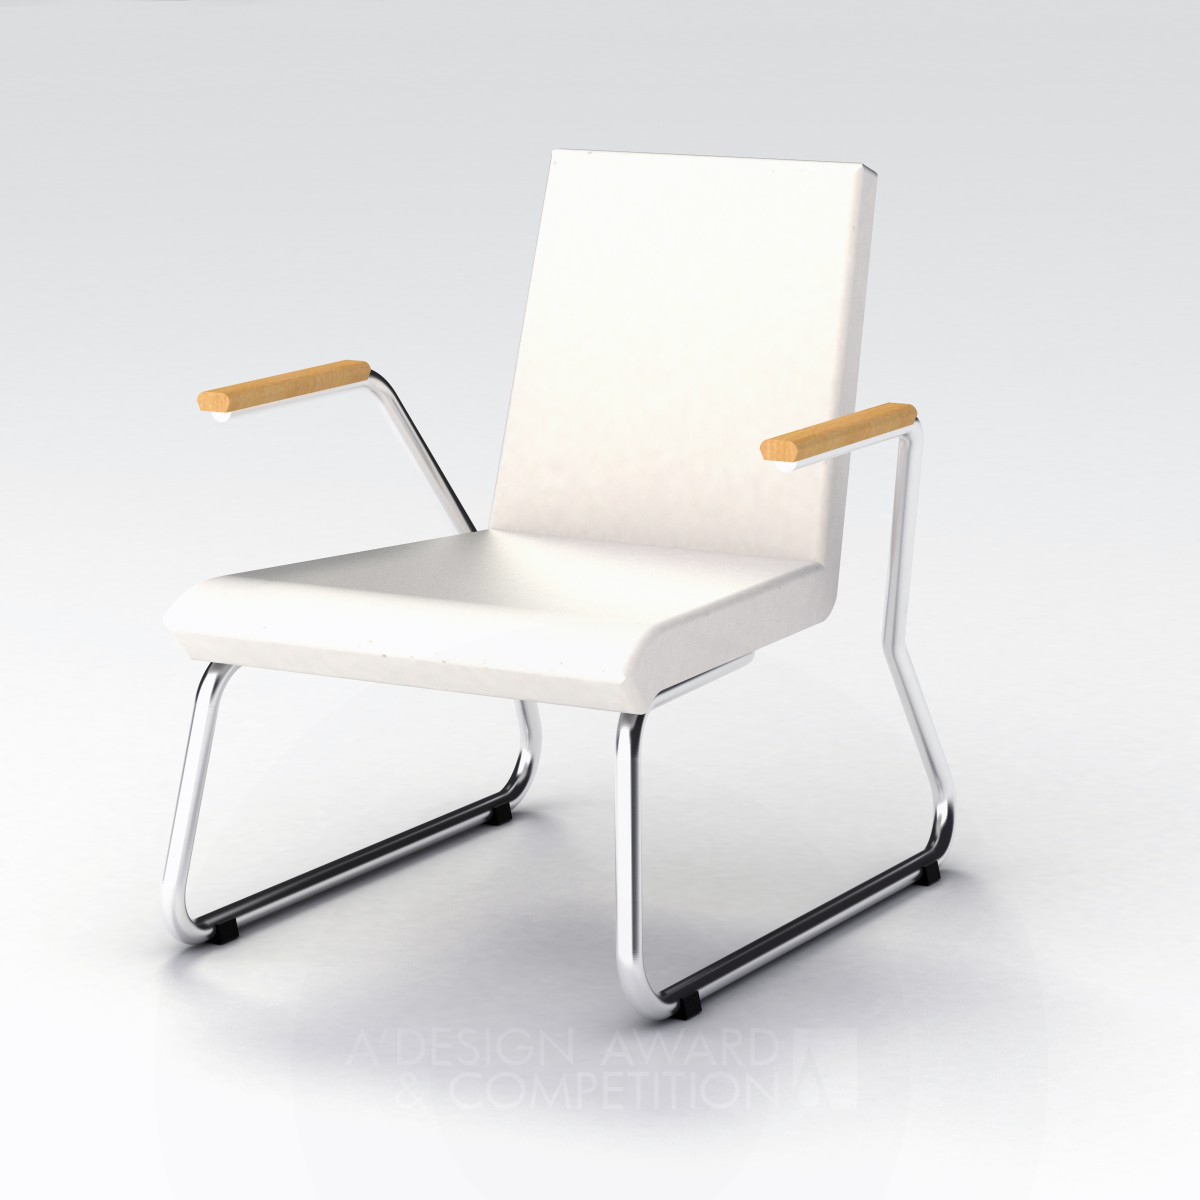 Opa Lounge chair by Claudio Sibille